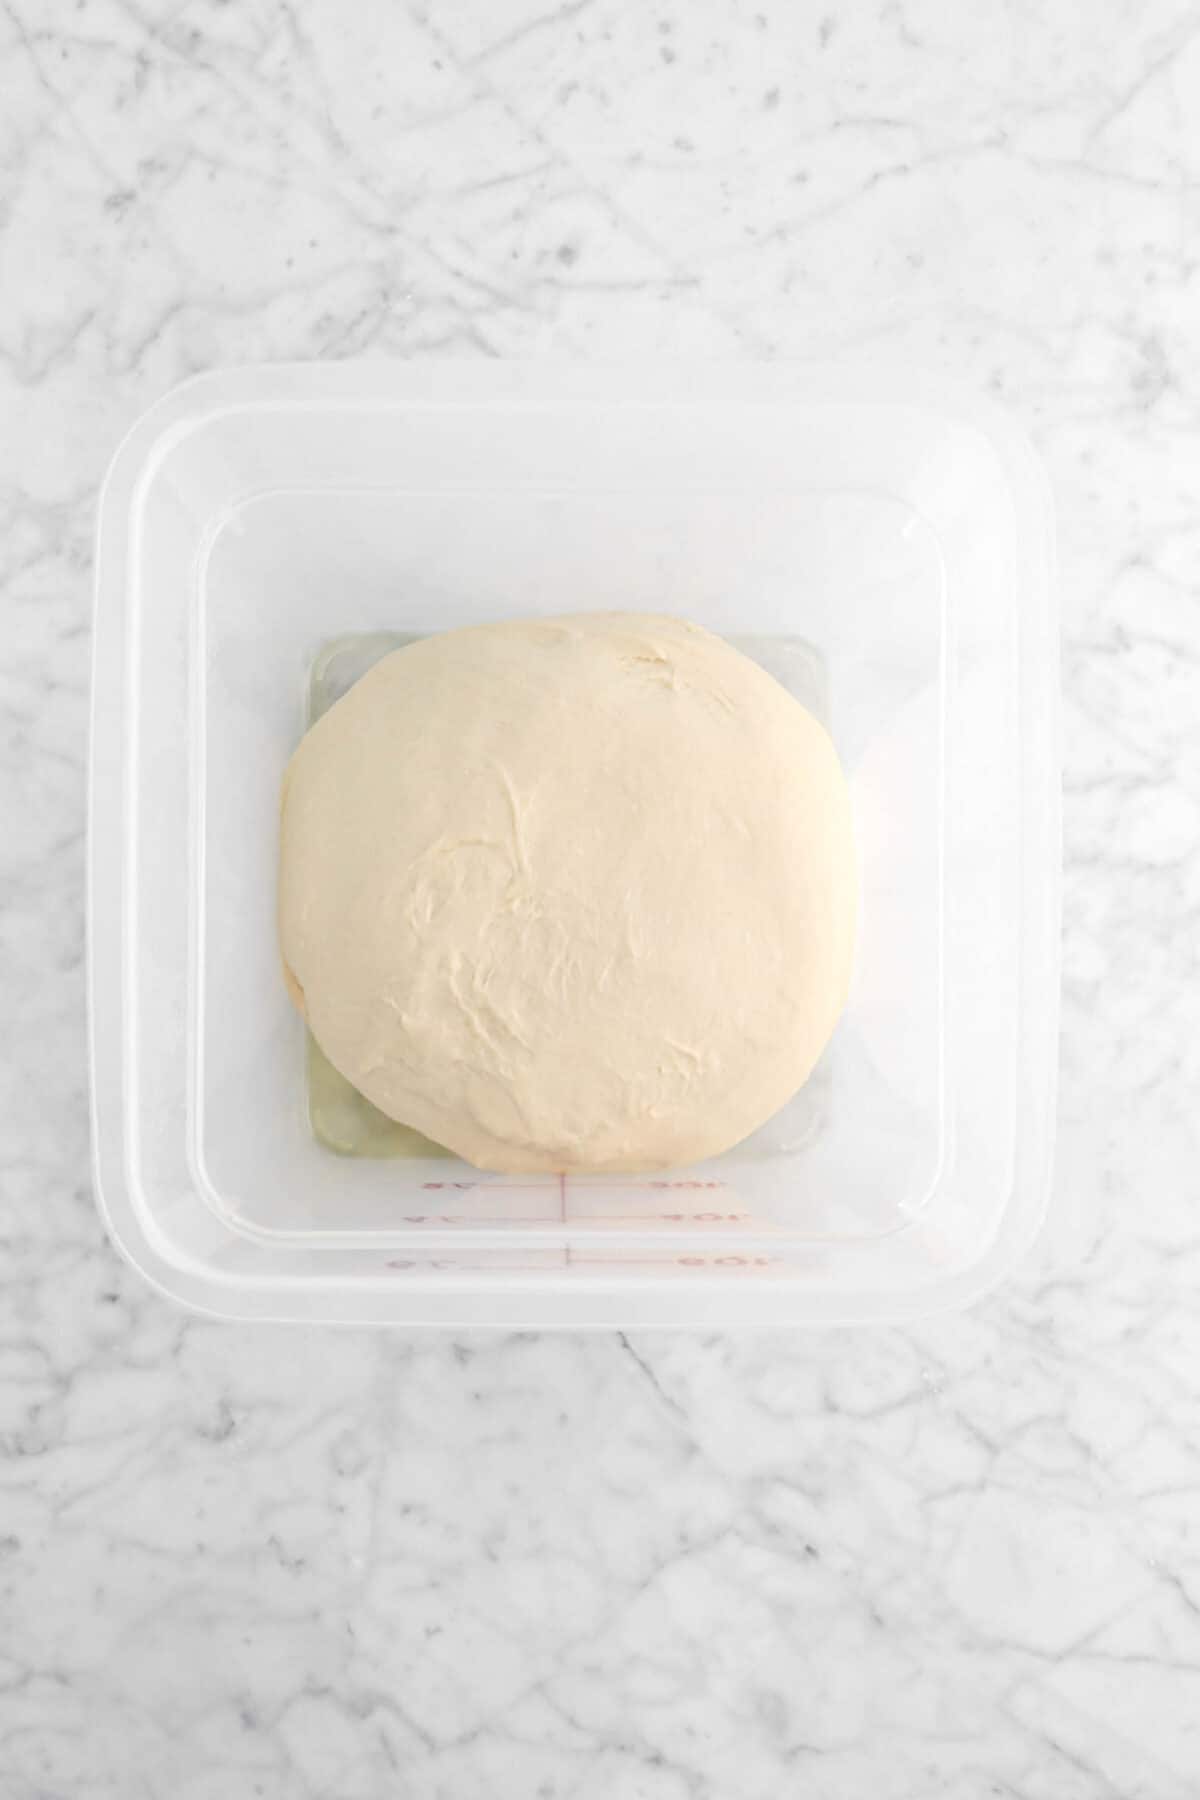 dough in large plastic container